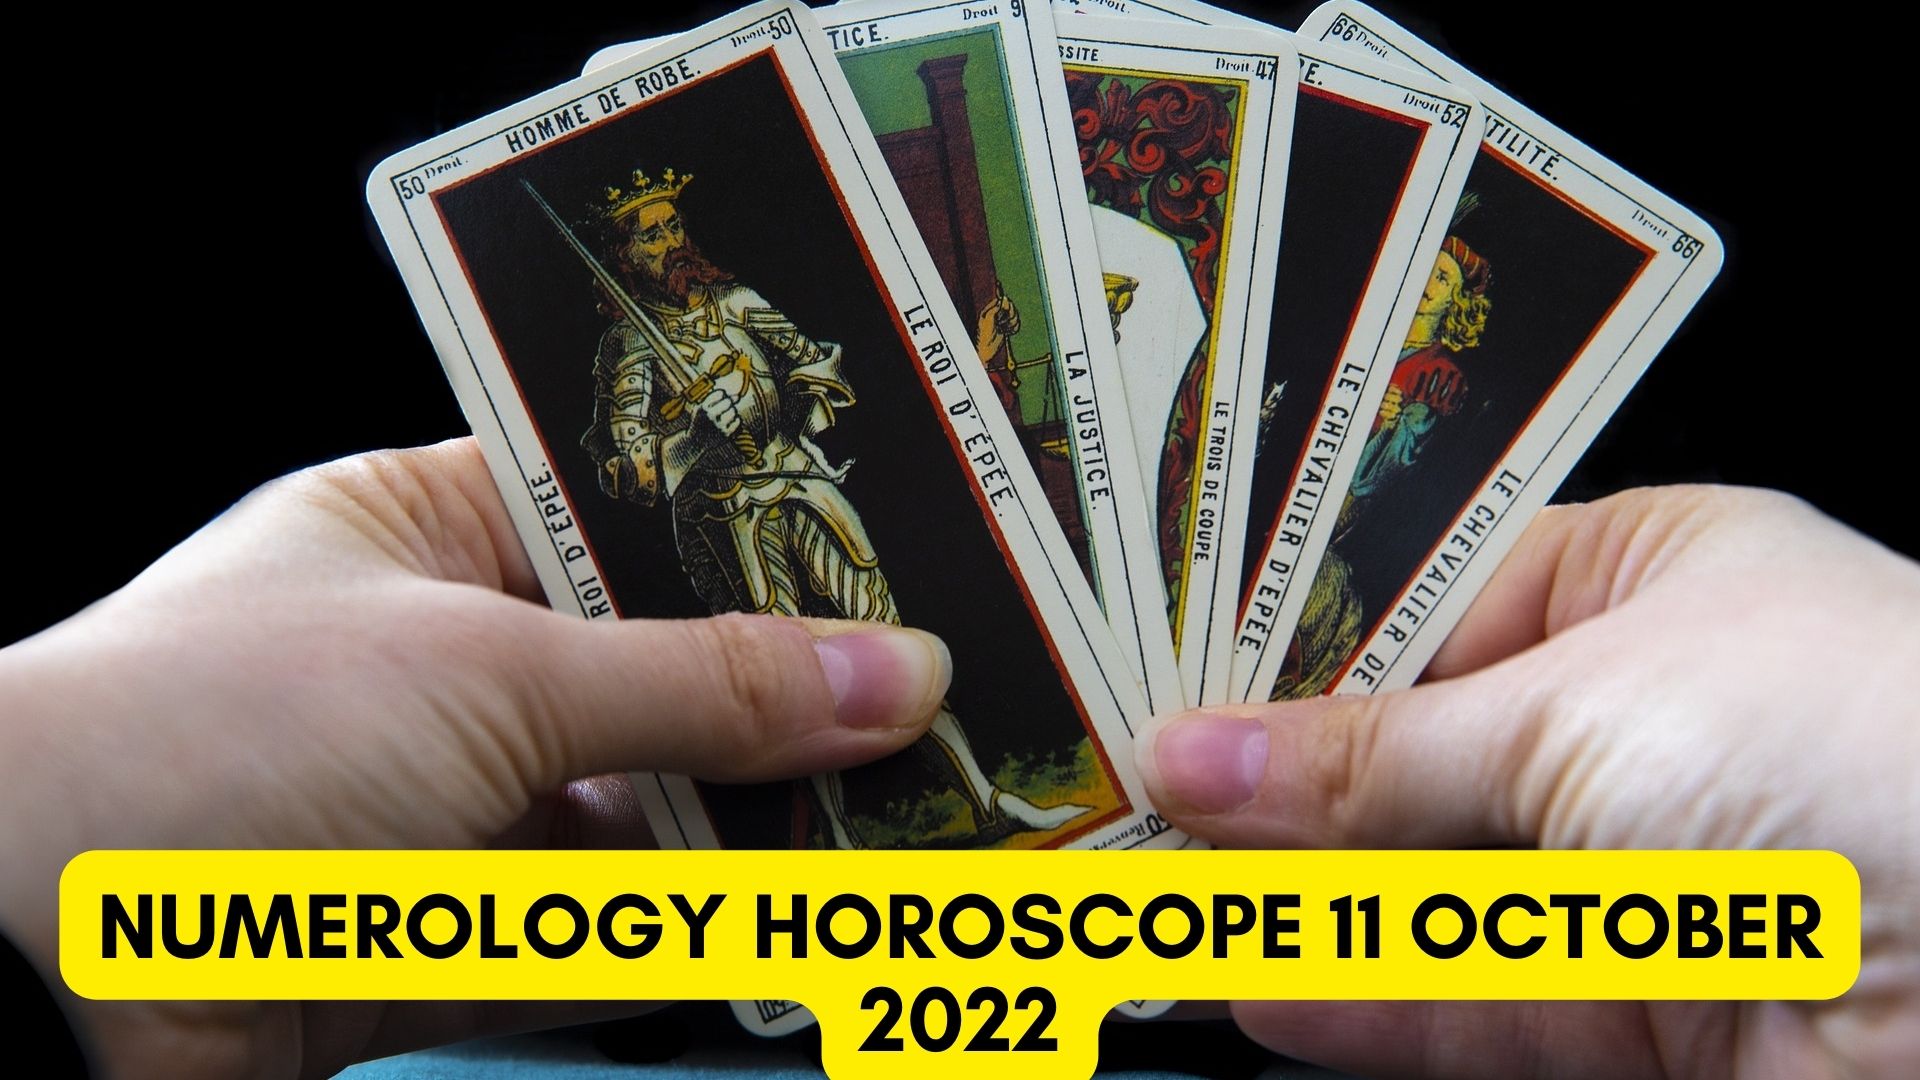 Numerology Horoscope 11 October 2022 Is A Boon For These Birthday People You Will Get Good News